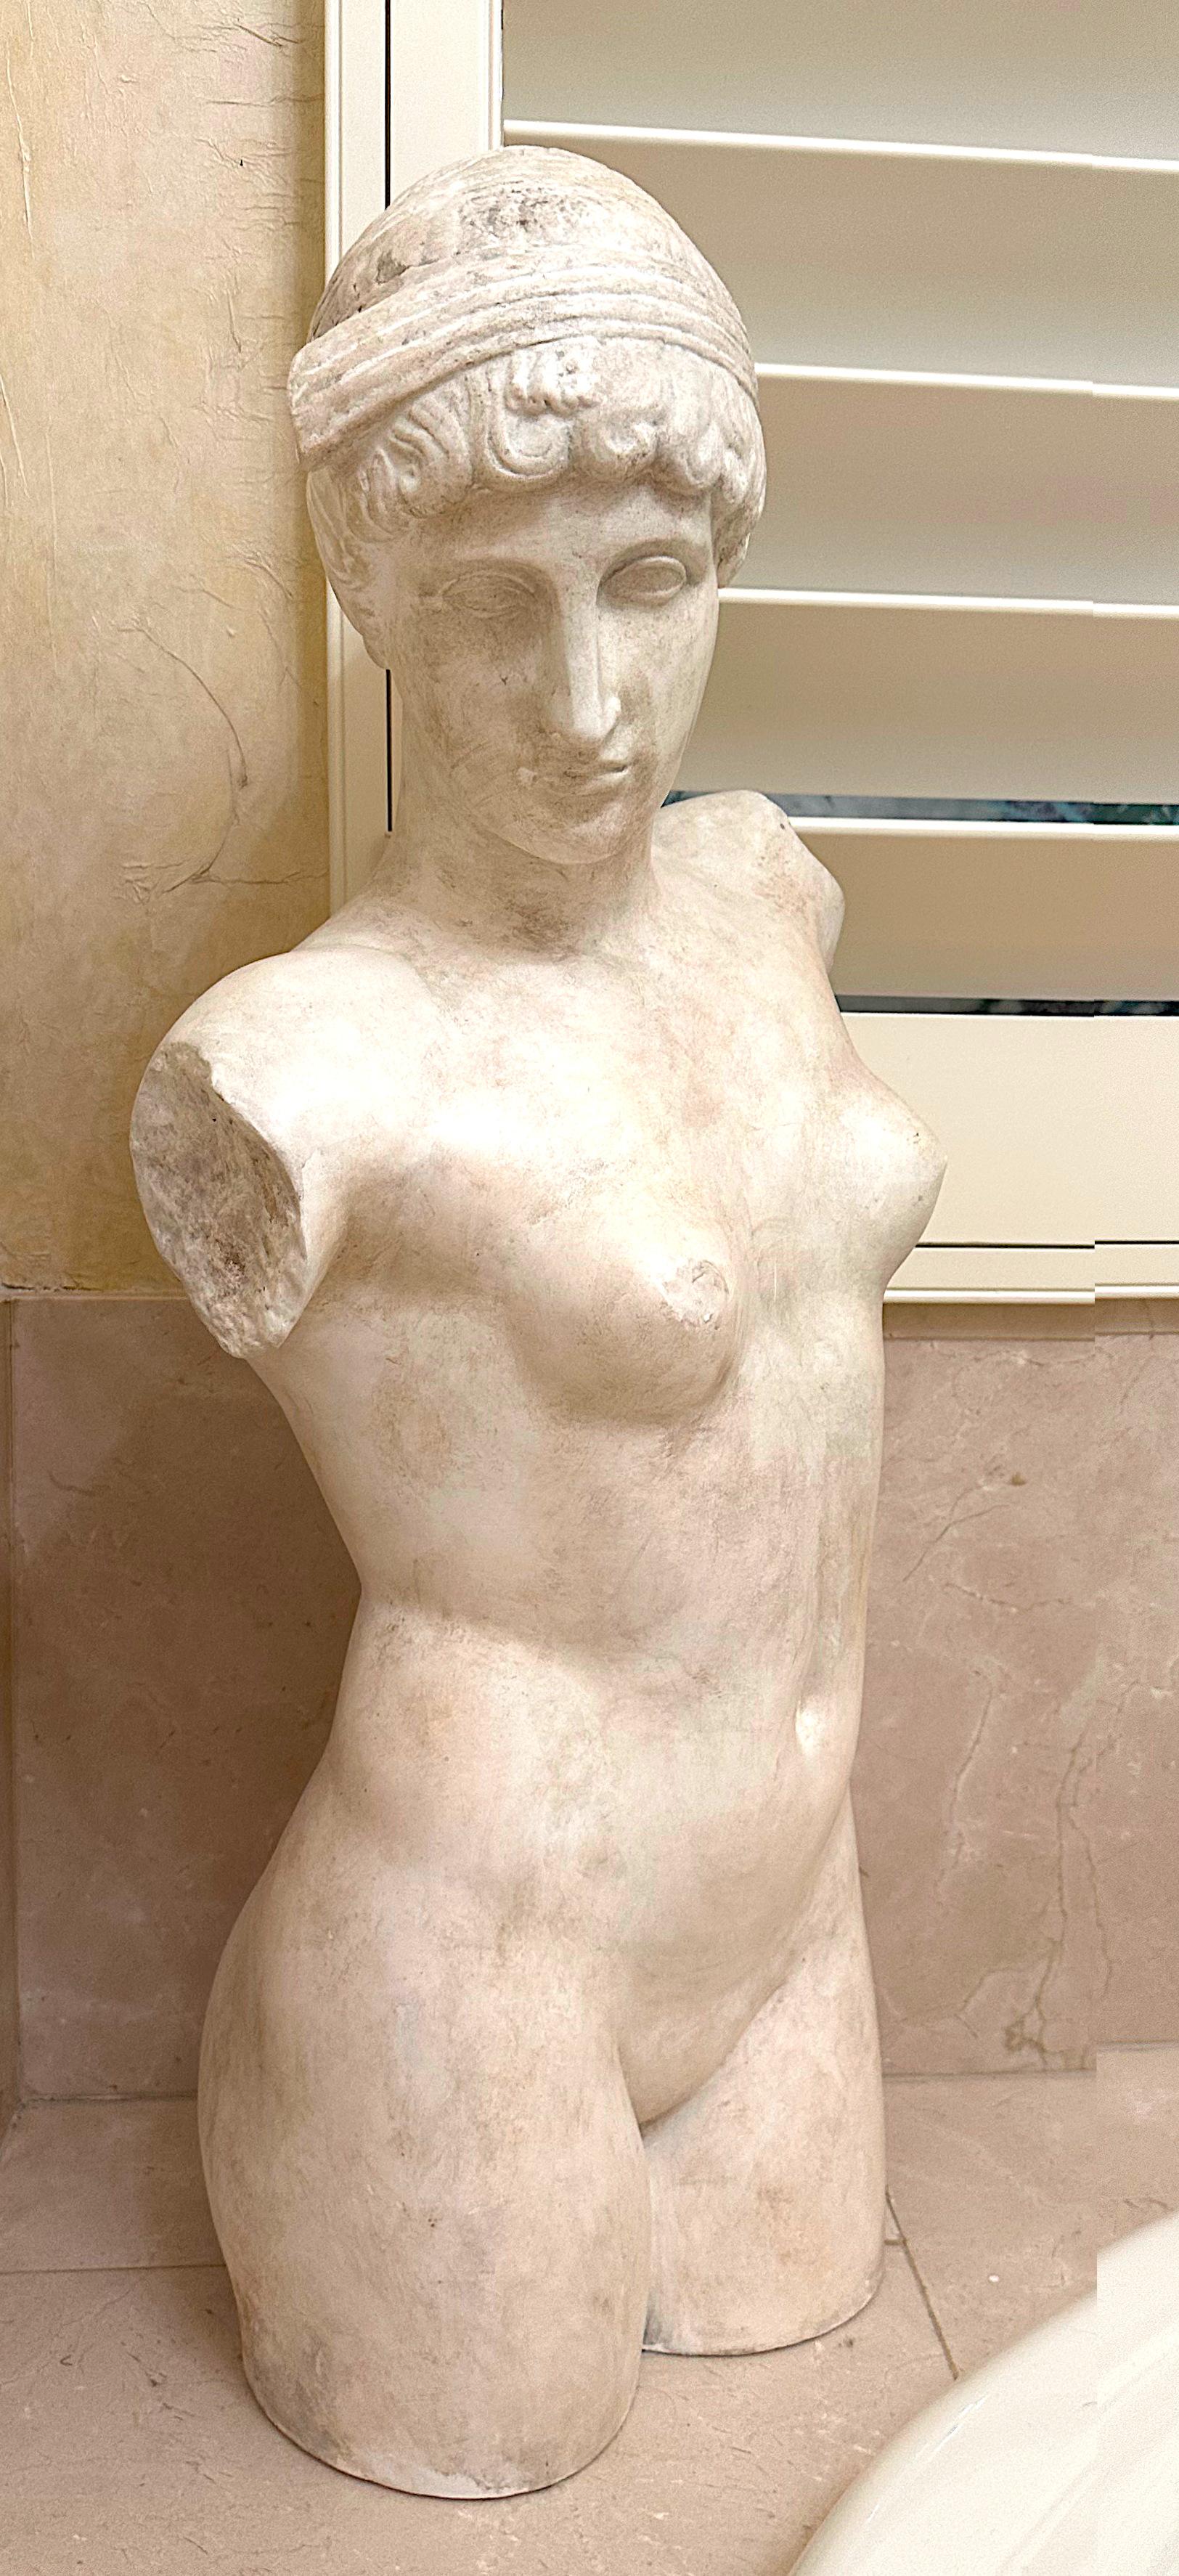 Faux Marble Torso of Venus
The composition female nude torso cast in the ancient Greek Style.
Height 38 in. (96.52 cm.) (approx)